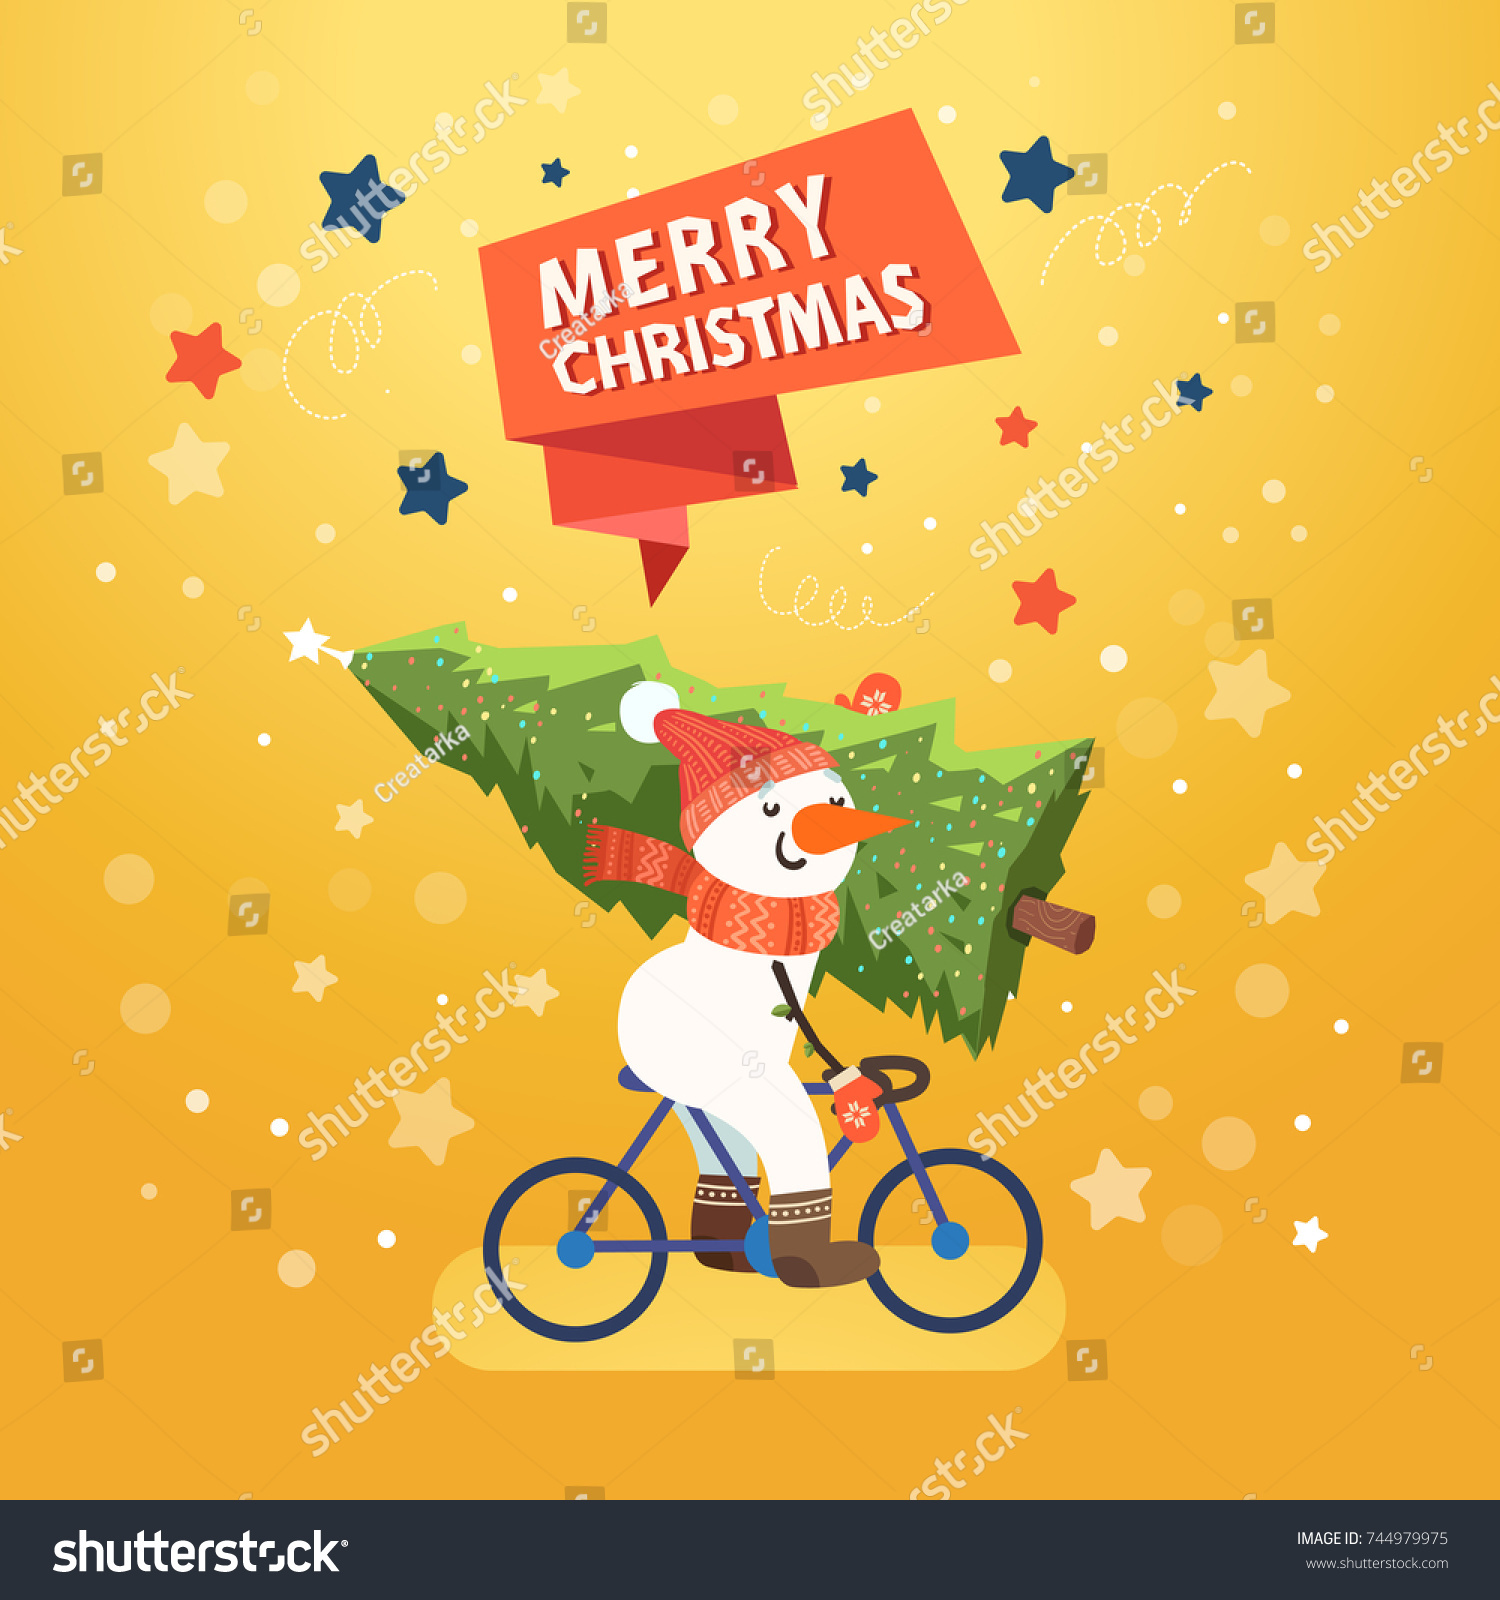 Merry Christmas with cute Snowman riding a bicycle Vector illustration template for Christmas cards